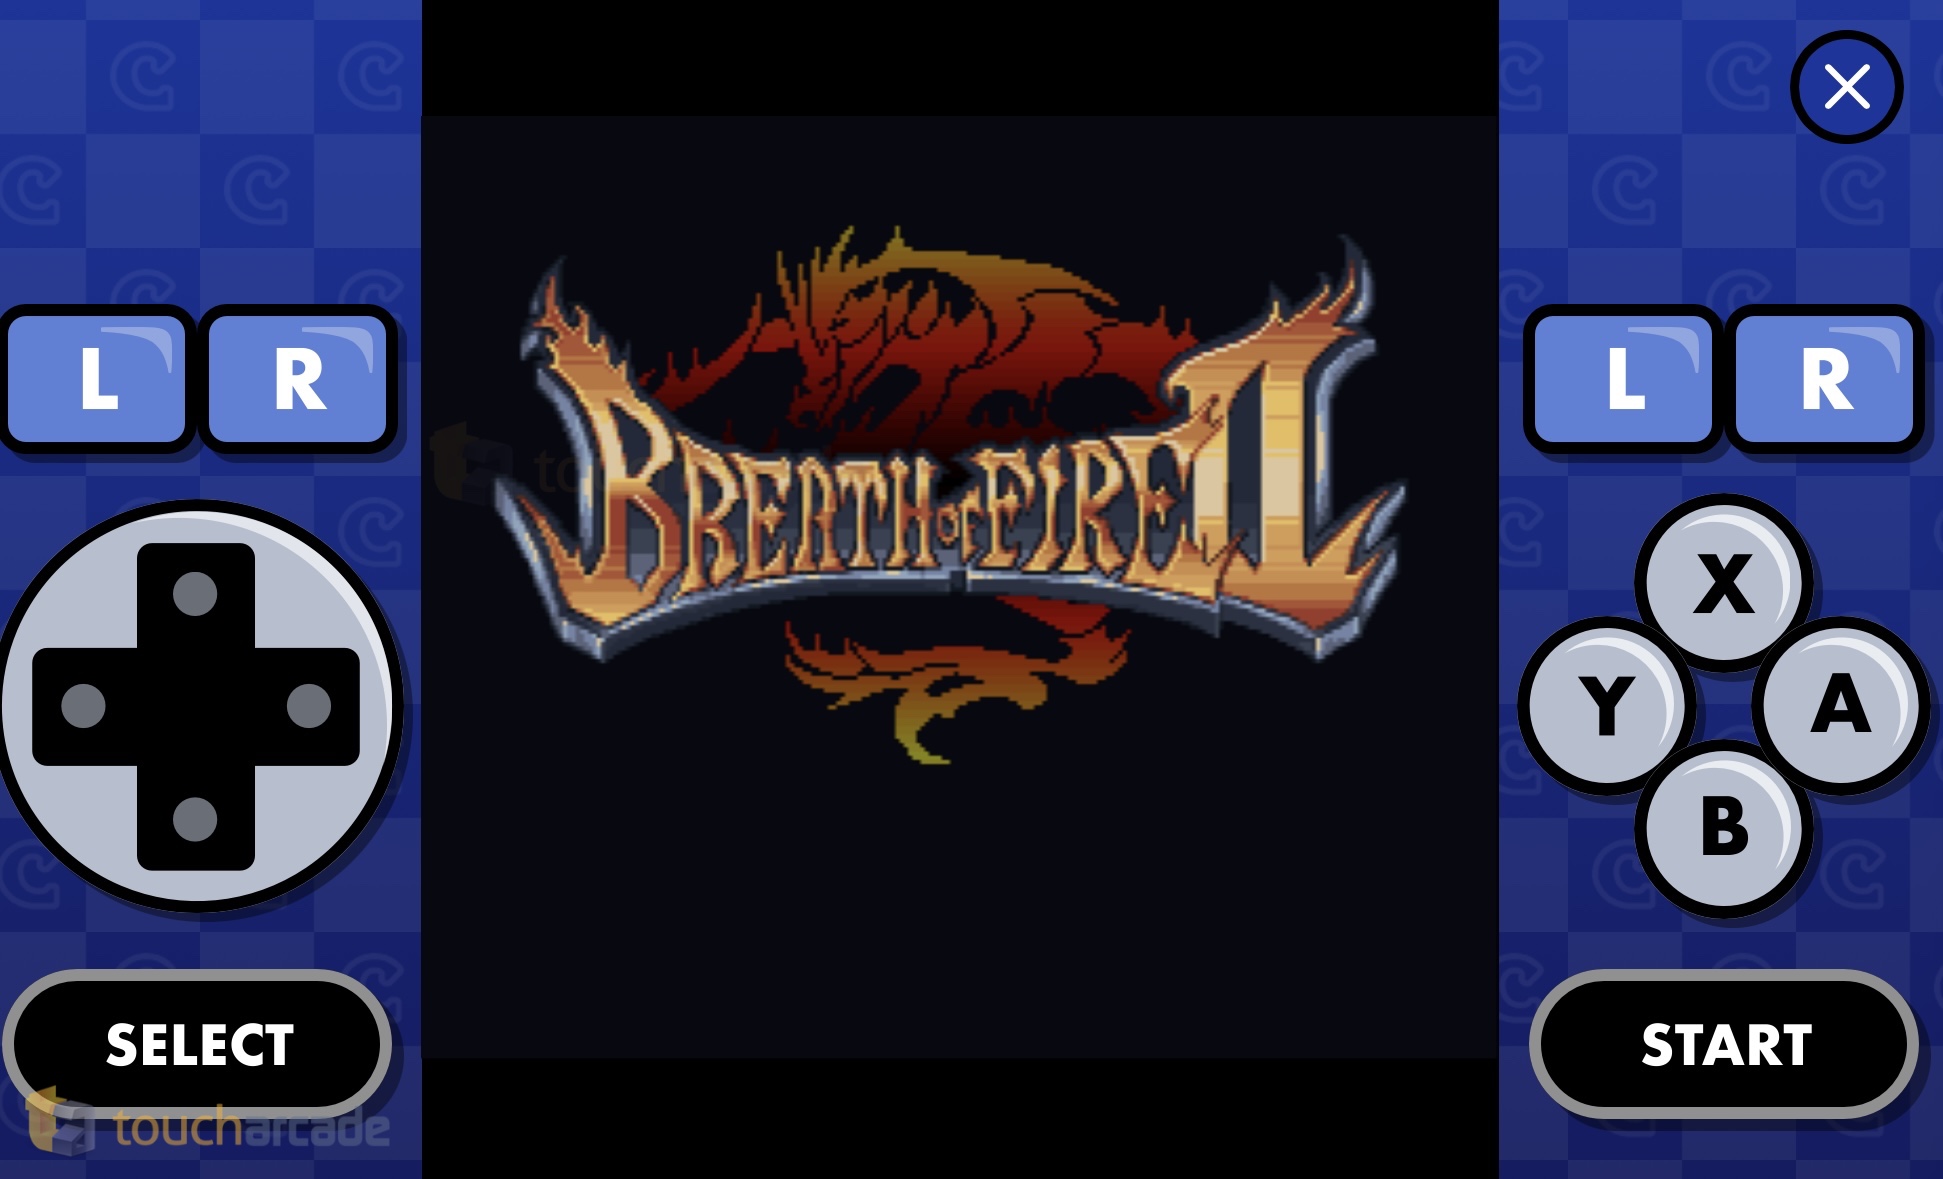 breath-of-fire-2-mobile-free-browser-iphone-android.jpg